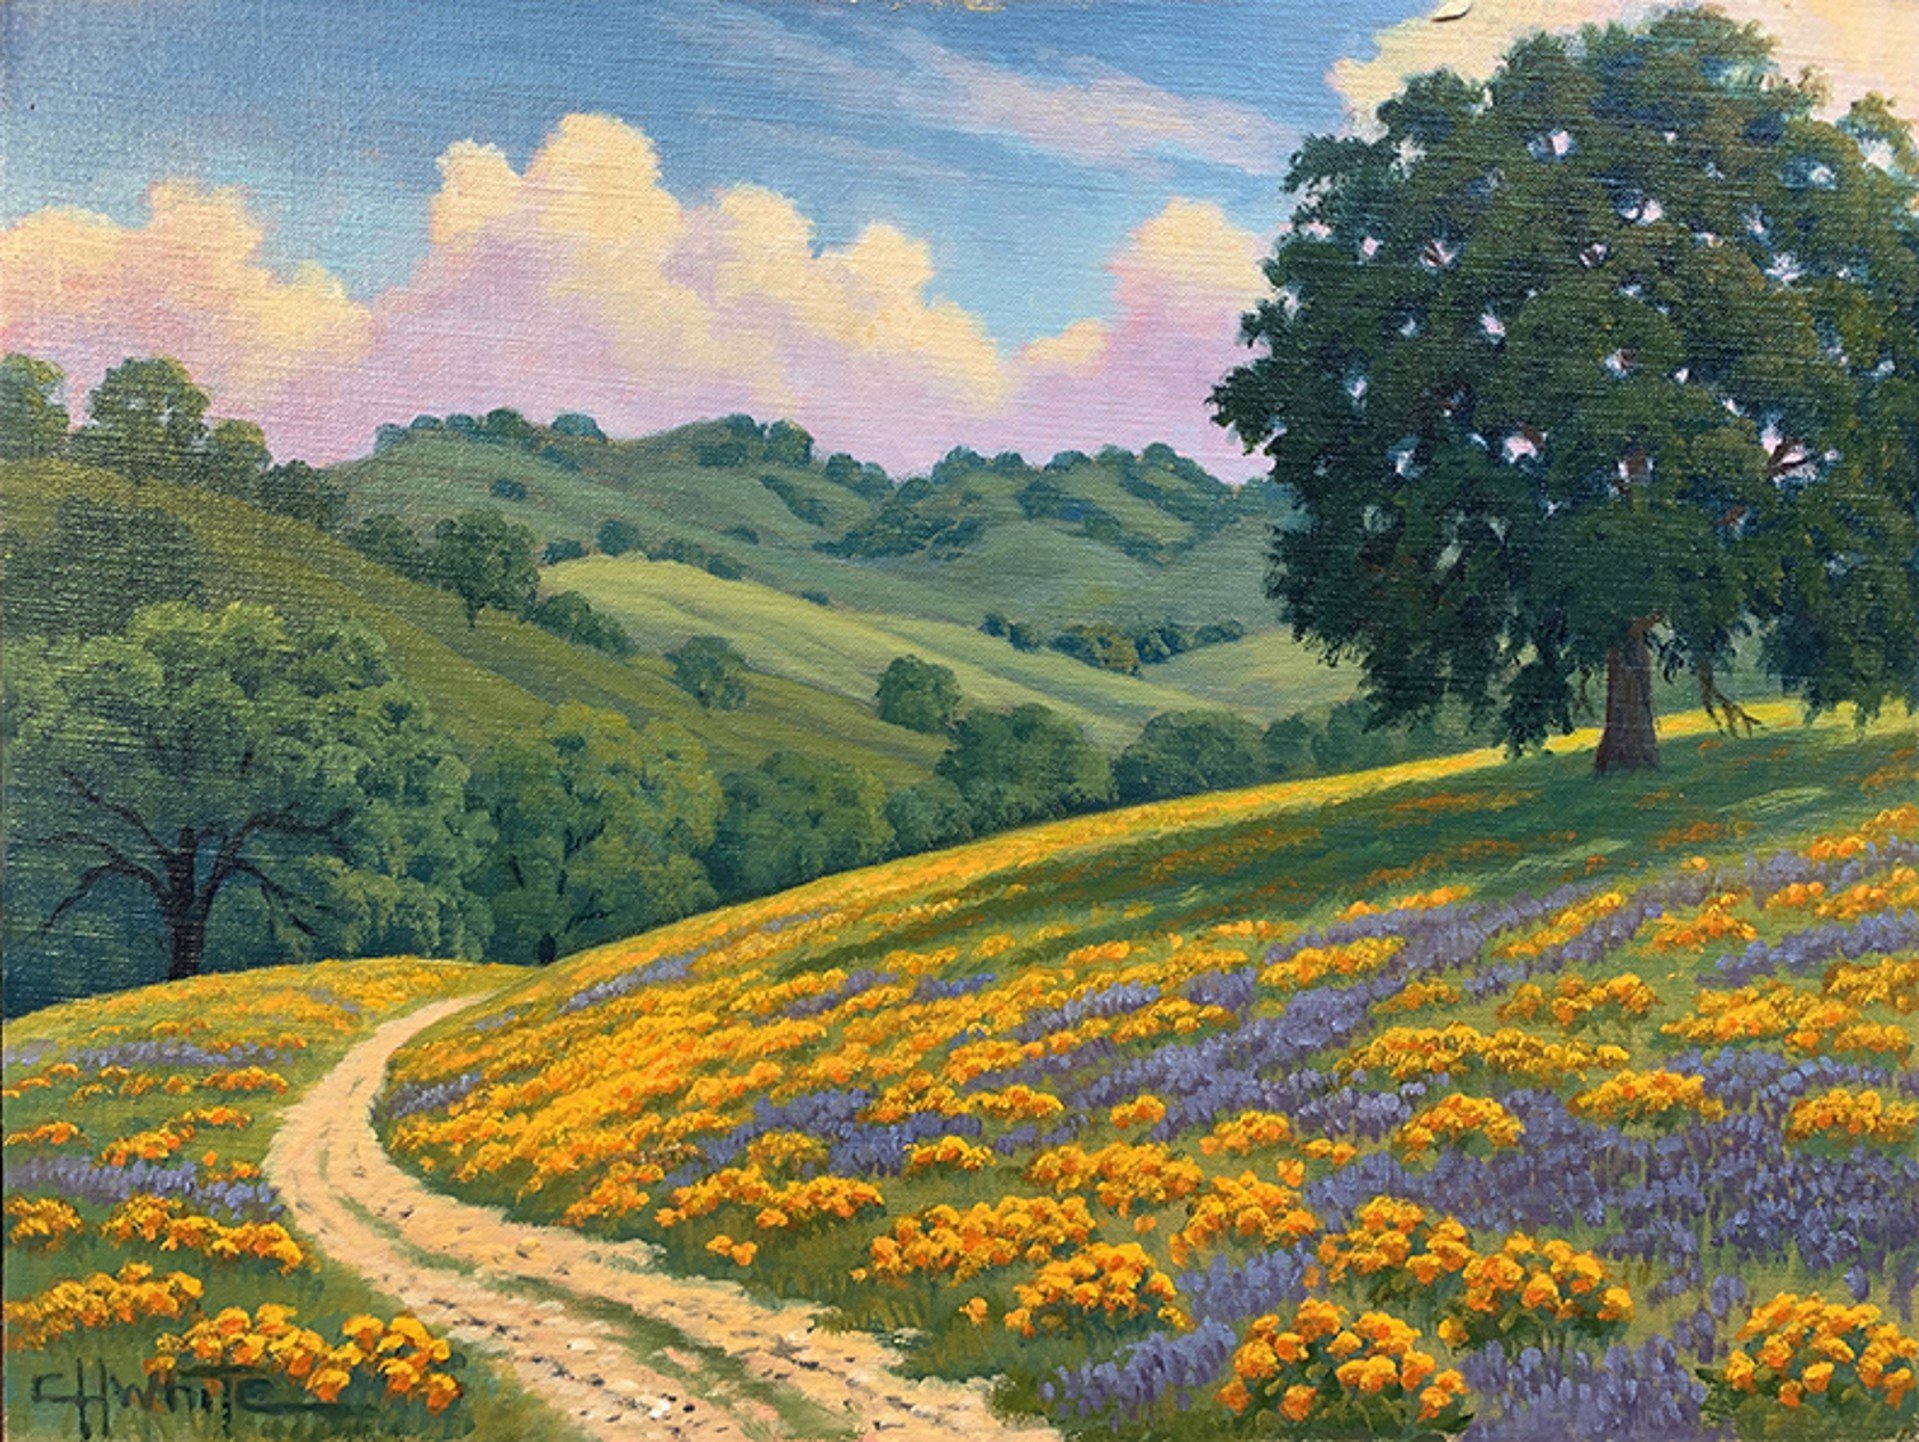 Road Through the Poppies by Charles White